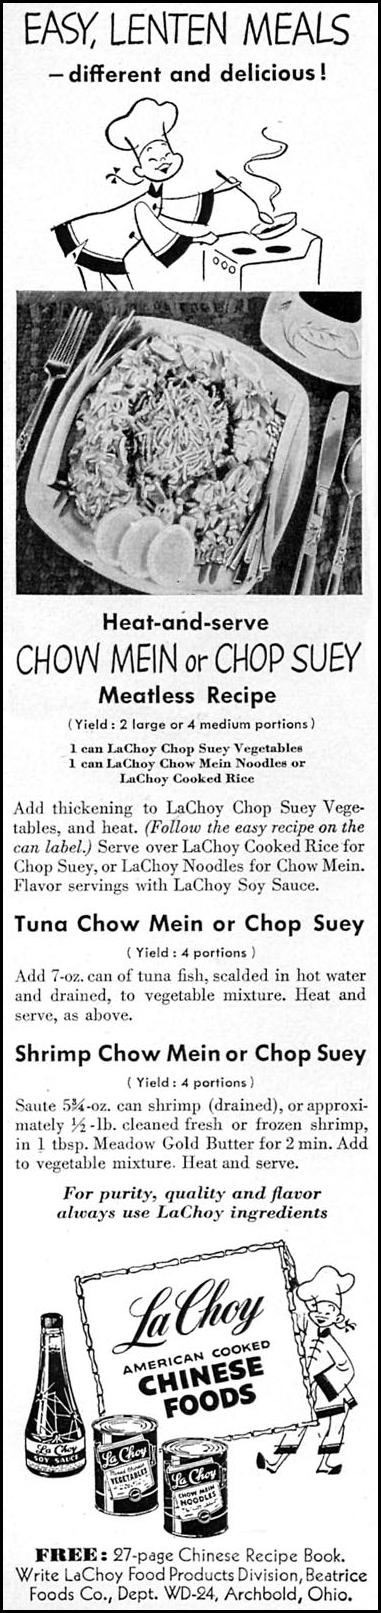 LA CHOY AMERICAN COOKED CHINESE FOODS
WOMAN'S DAY
02/01/1954
p. 104